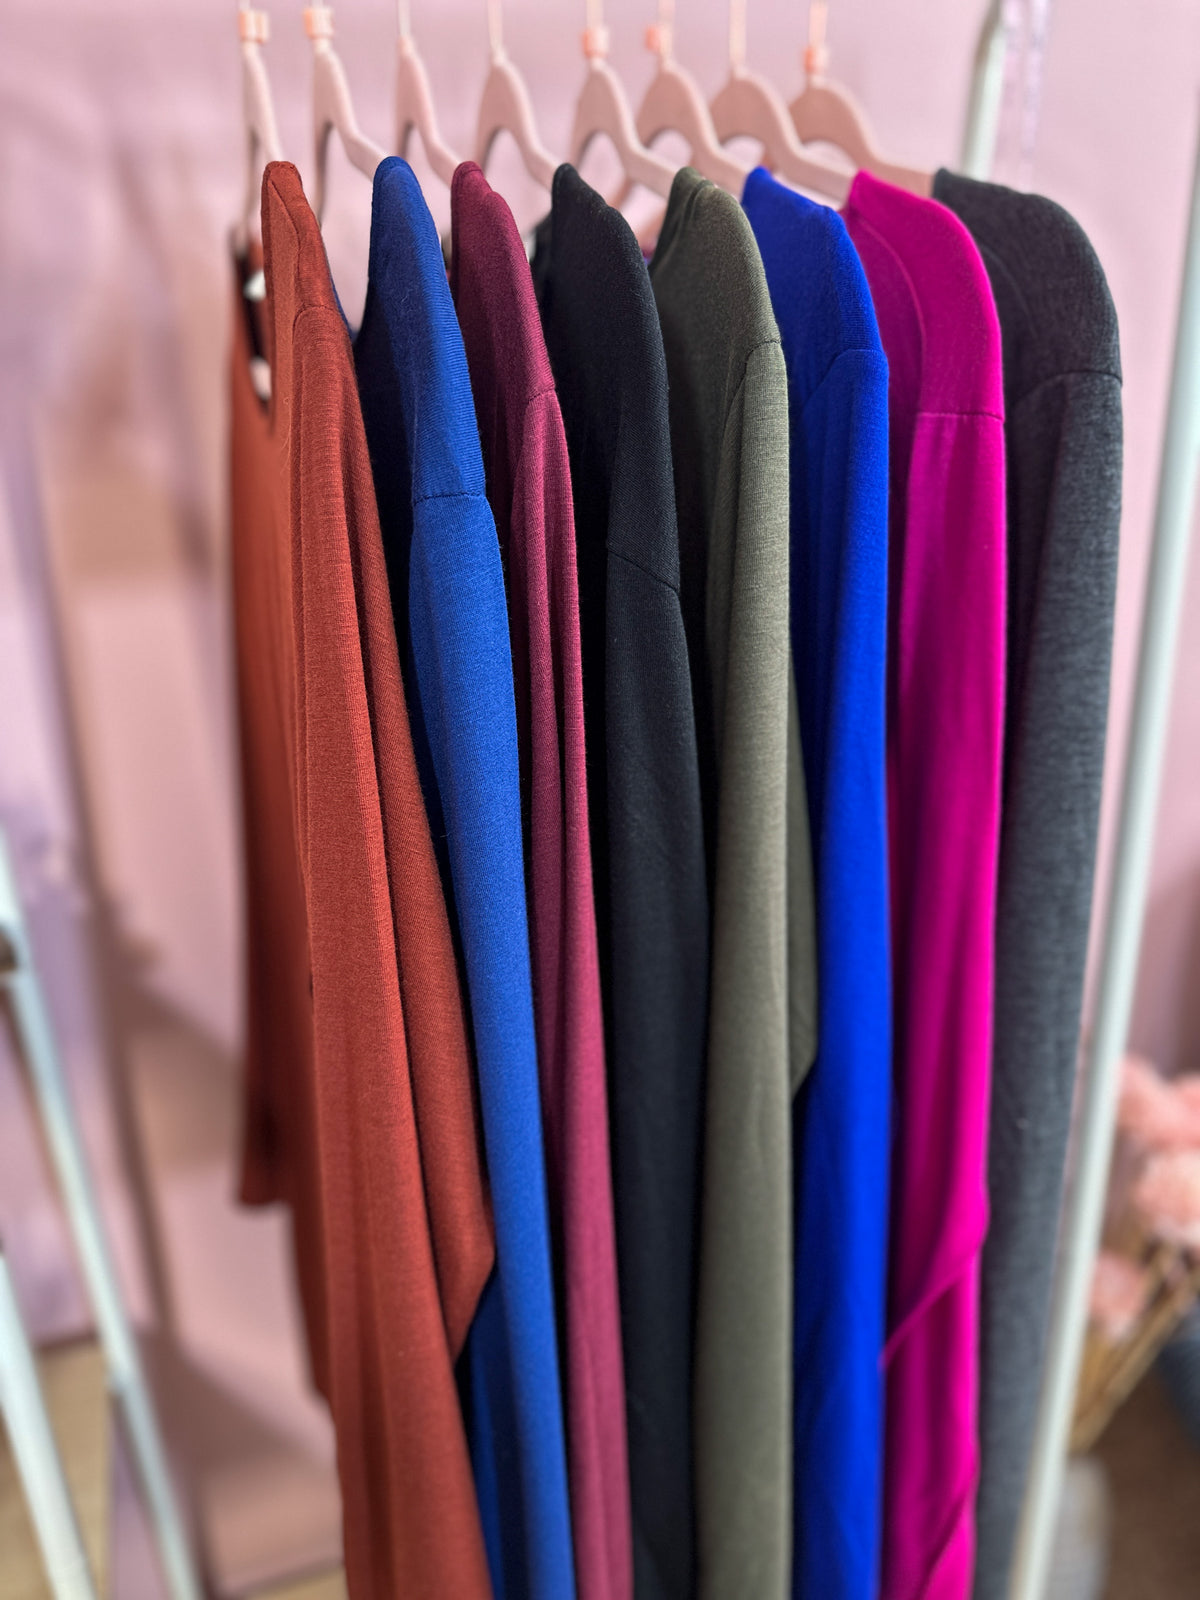 Perfect Days Premium Long Sleeve Pocket Tunic - Multiple Colors!